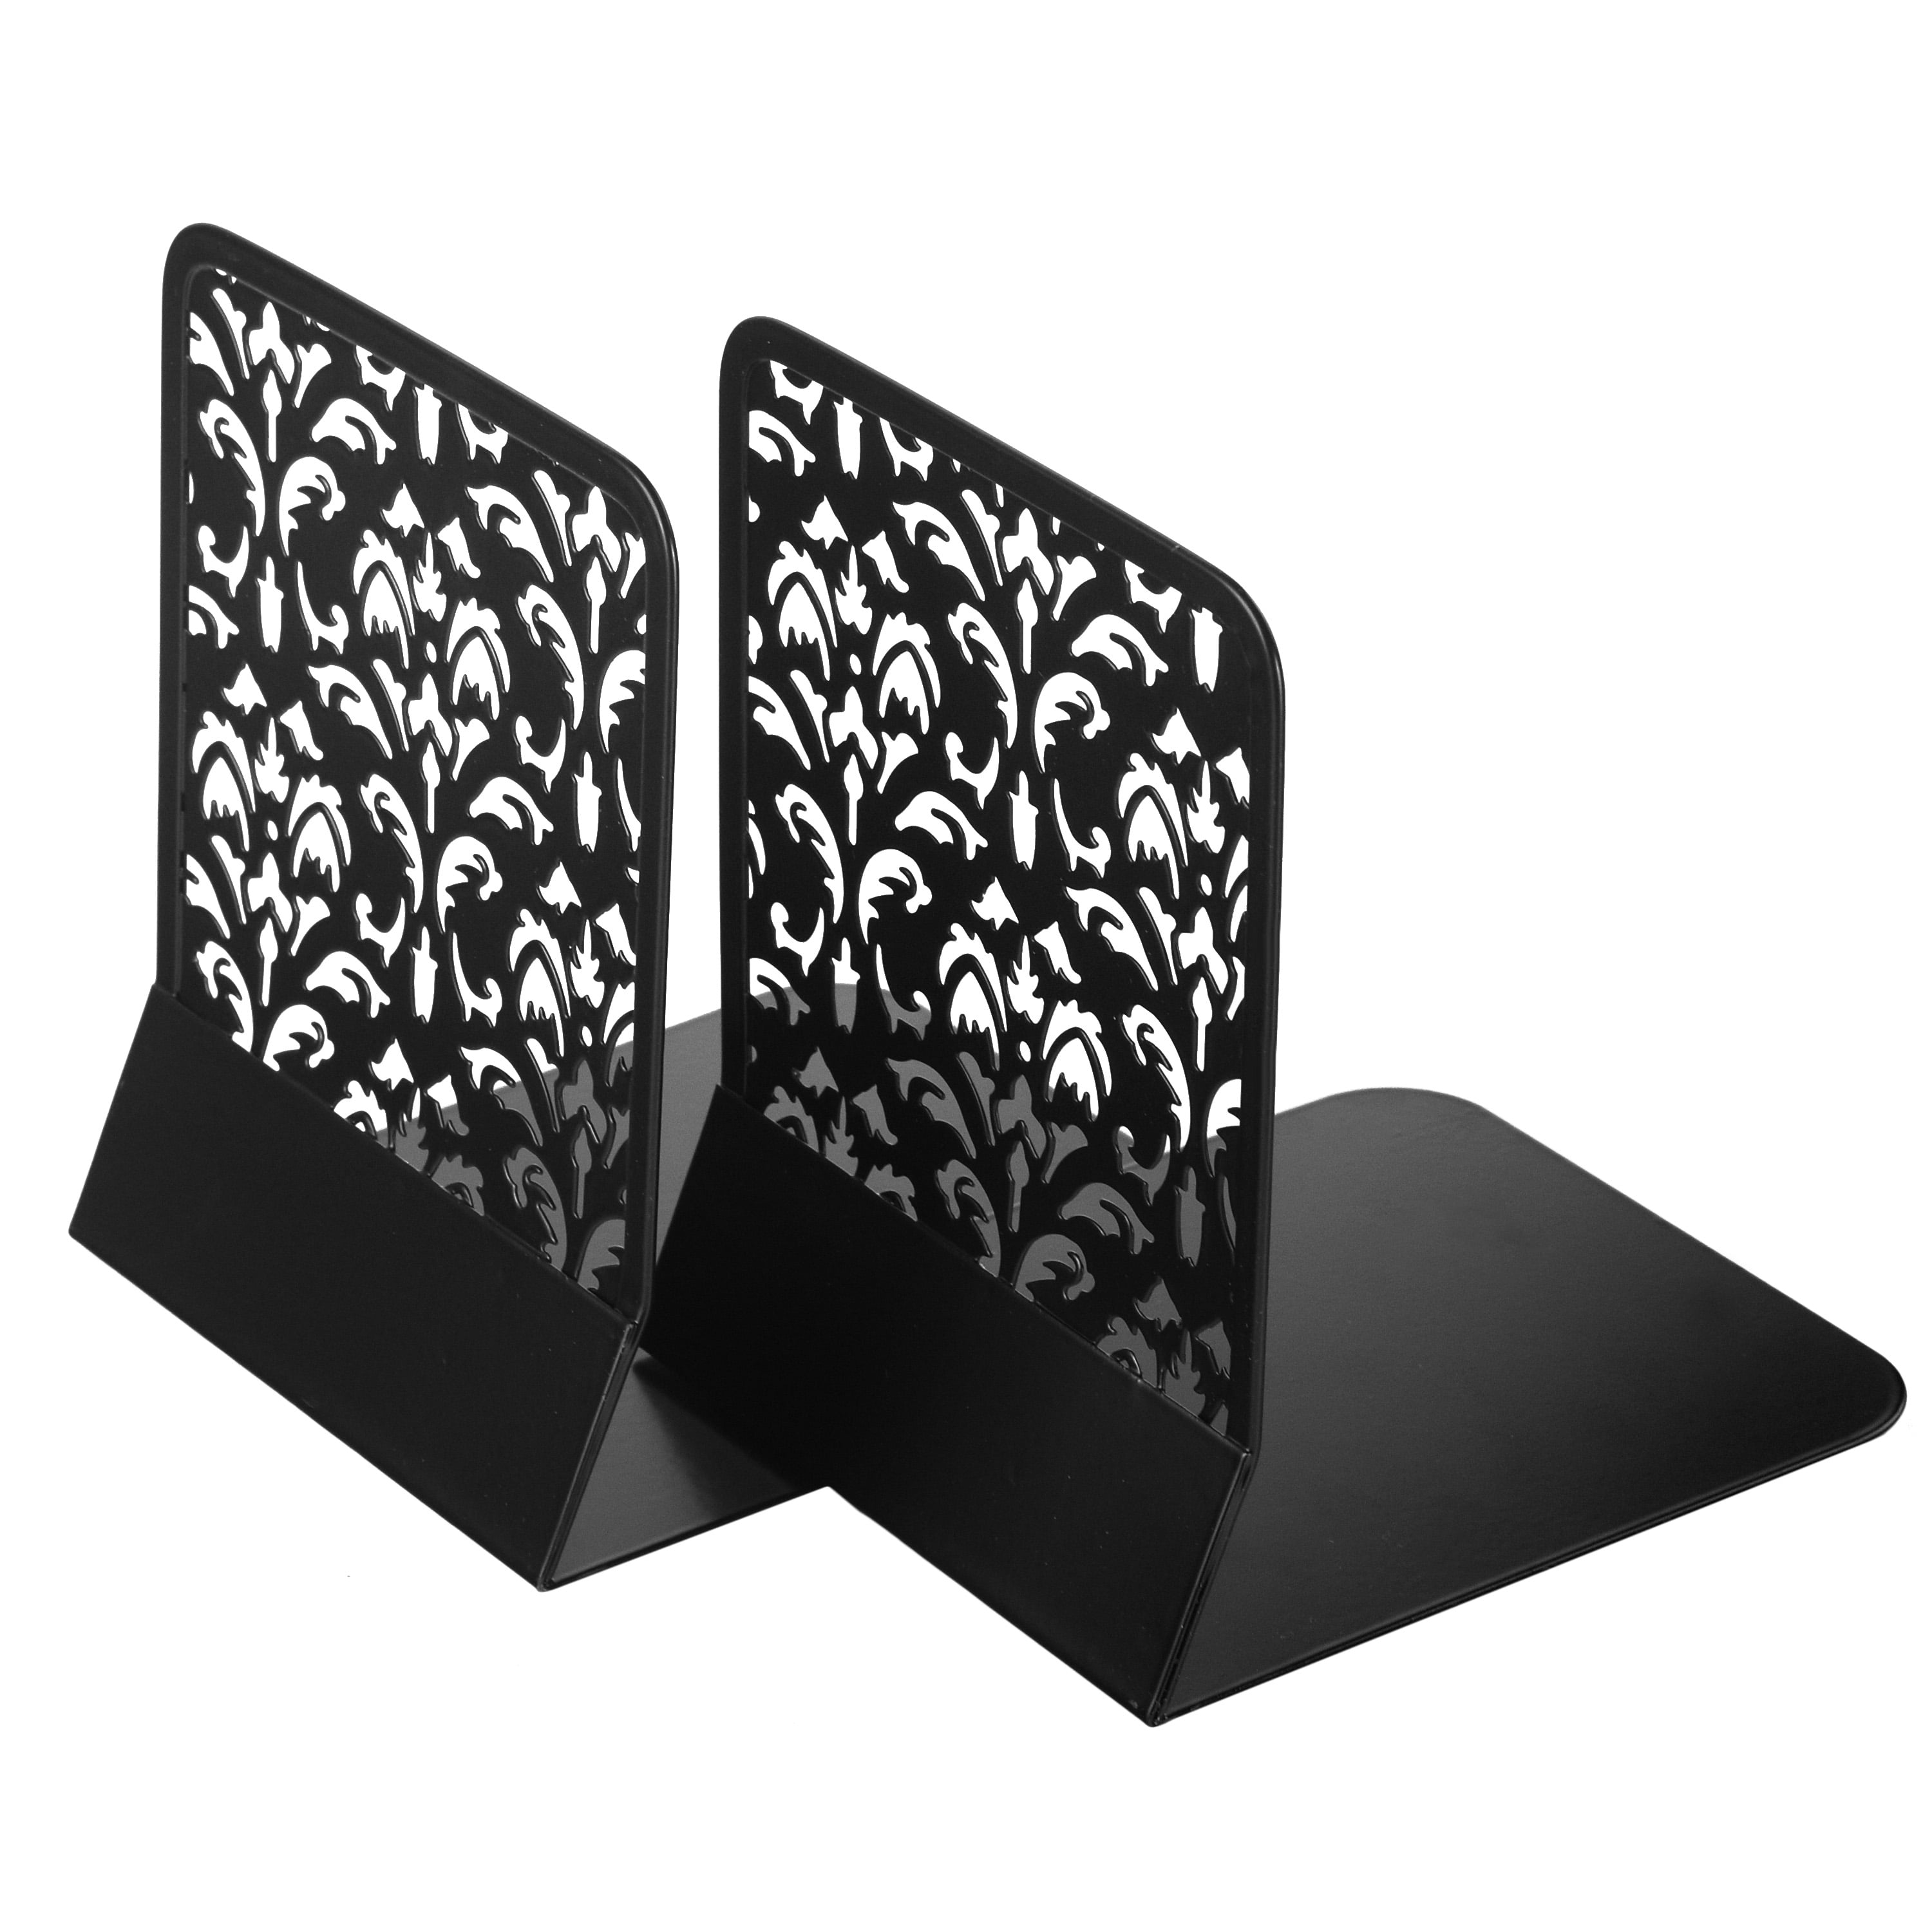 Lightweight & Durable Book Holders Lafbo Luxurious Metal Black Bookends 2 Sets of 2 Book Supports 4 Floral Pattern Engraved Book Stands Measures 6.7 x 5.2 x 6.3 inches Non-Slip Book Ends 